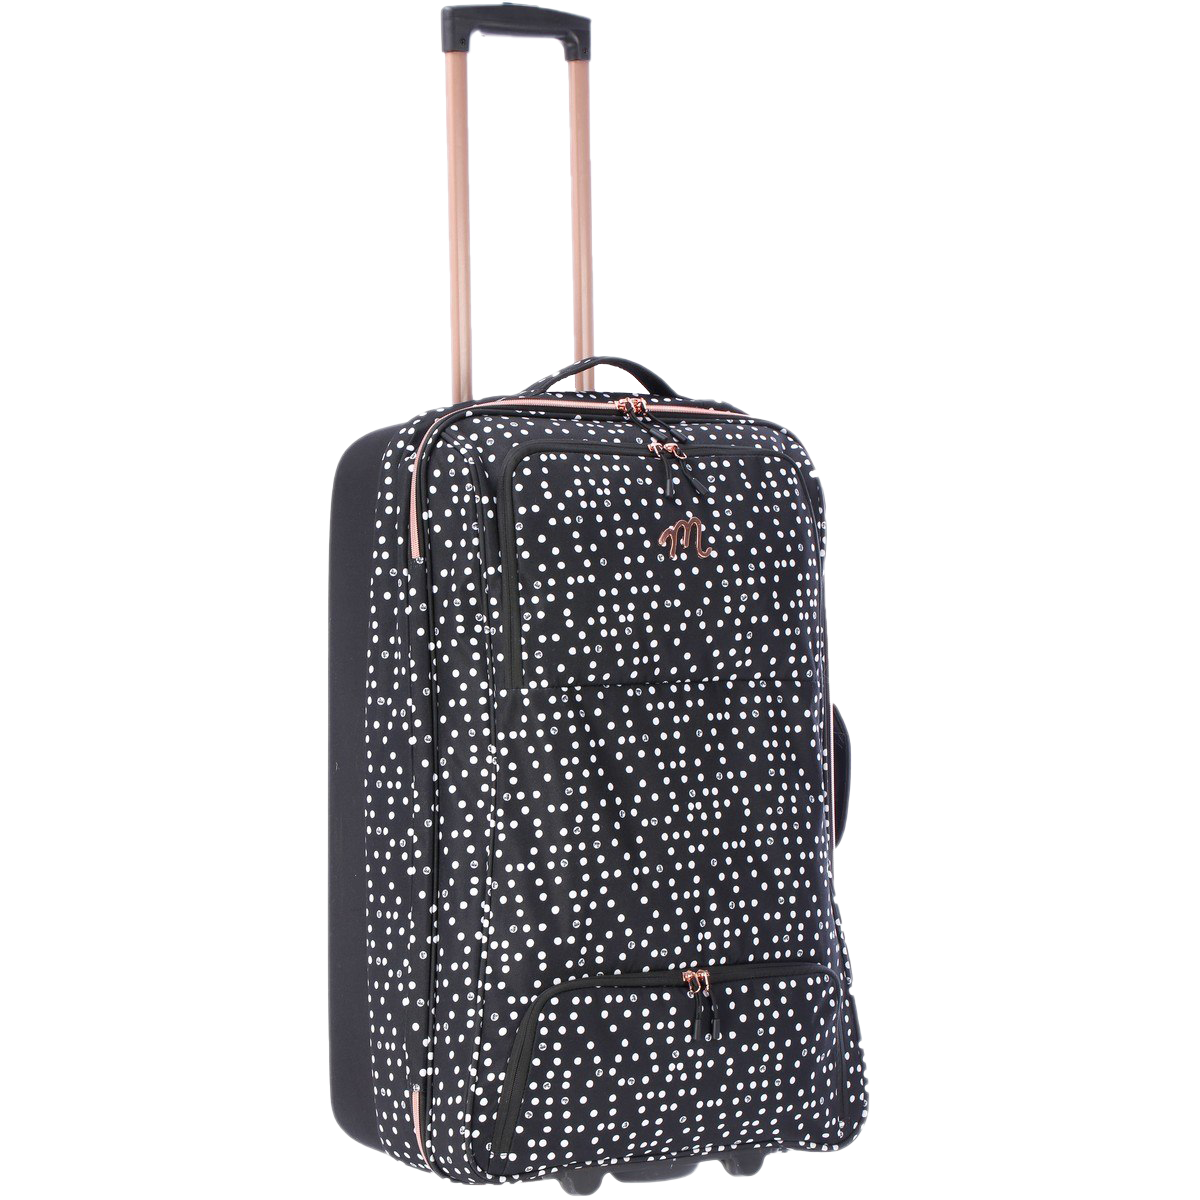 Black Suitcase PNG Clipart Background